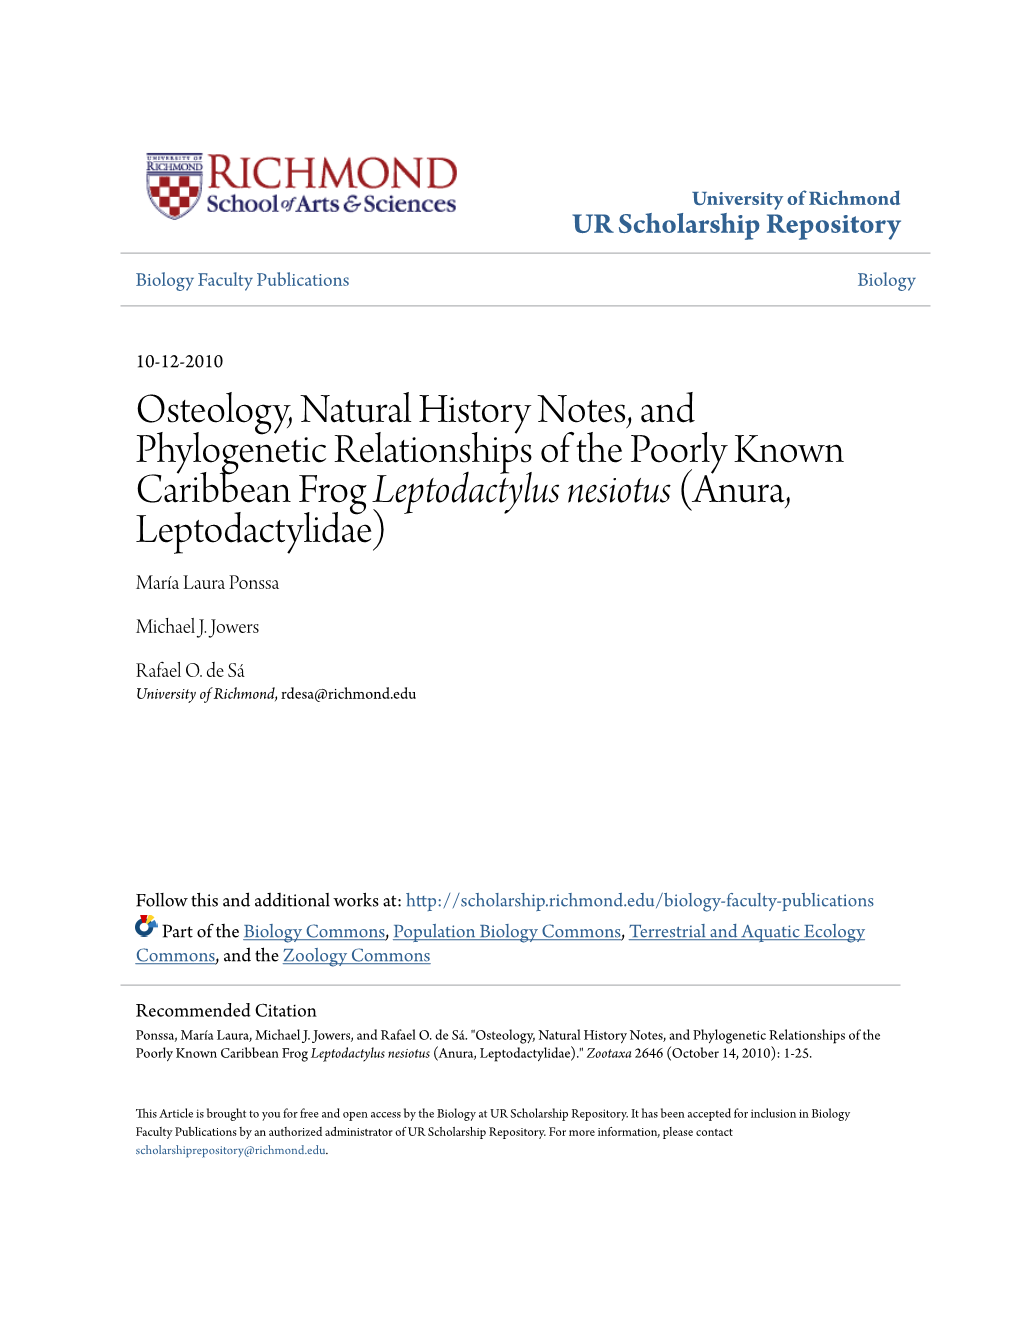 Osteology, Natural History Notes, and Phylogenetic Relationships of the Poorly Known Caribbean Frog Leptodactylus Nesiotus (Anura, Leptodactylidae) María Laura Ponssa